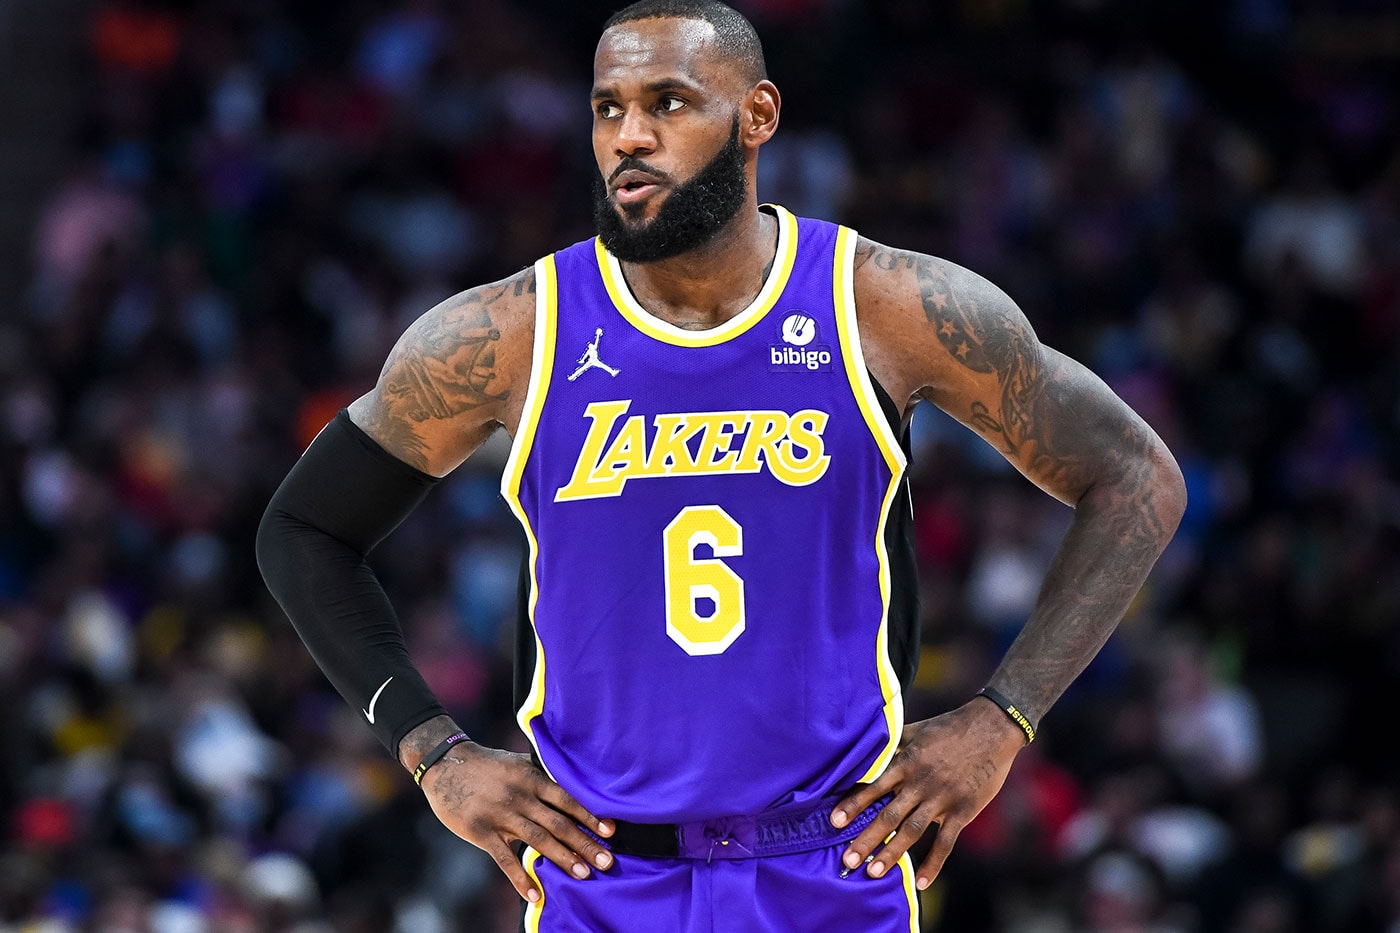 LeBron James Responds to Isaiah Stewart's Claims of Purposefully Elbowing Him nba detroit pistons los angeles lakers basketball 